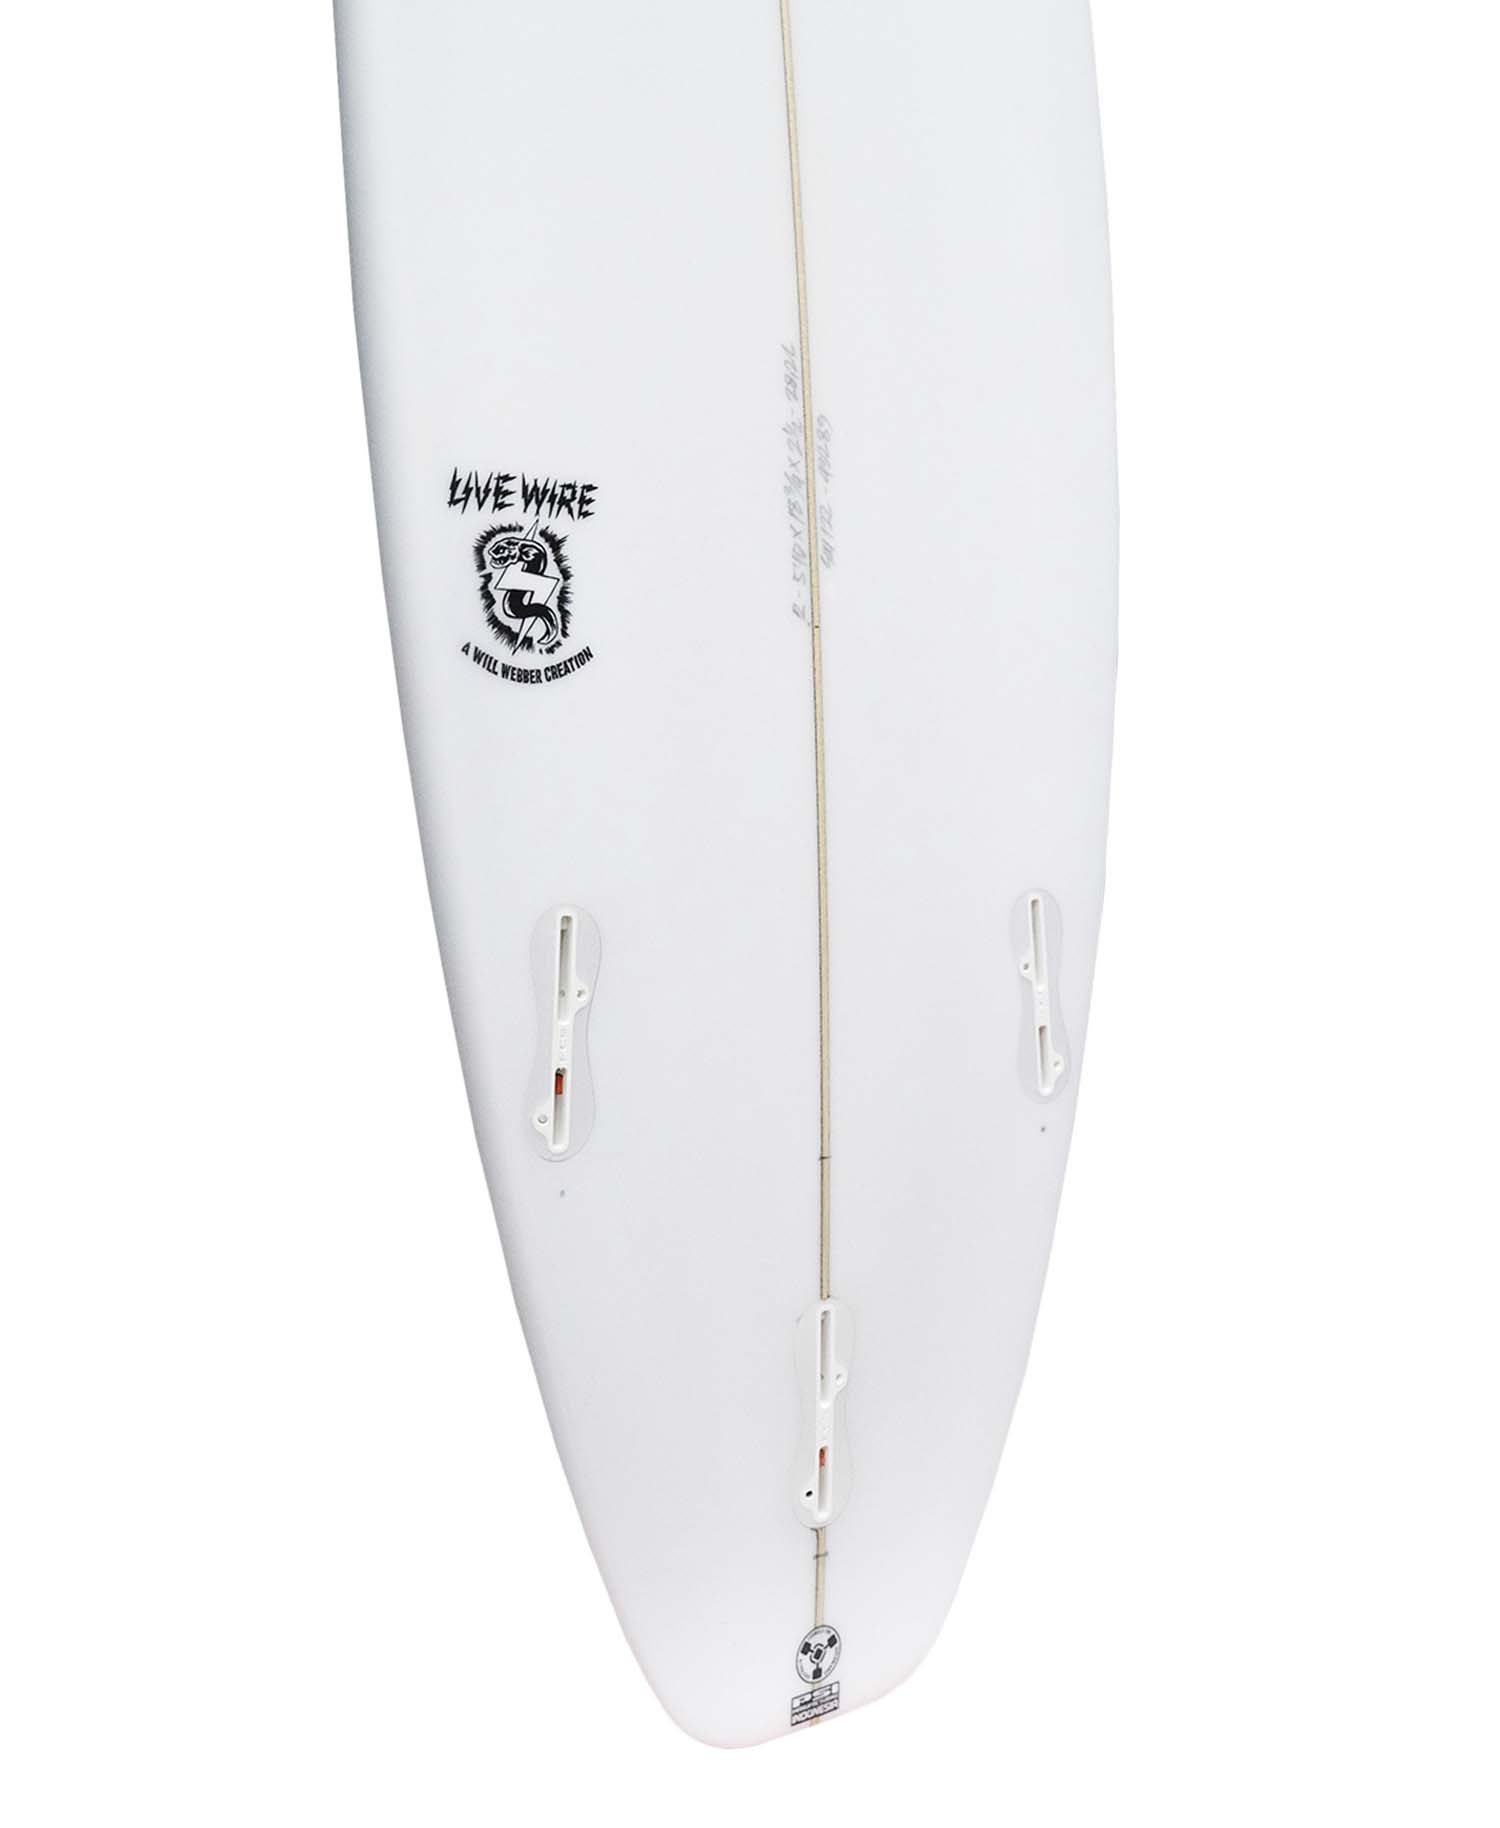 WILL WEBBER 'LIVE WIRE' SHORTBOARD